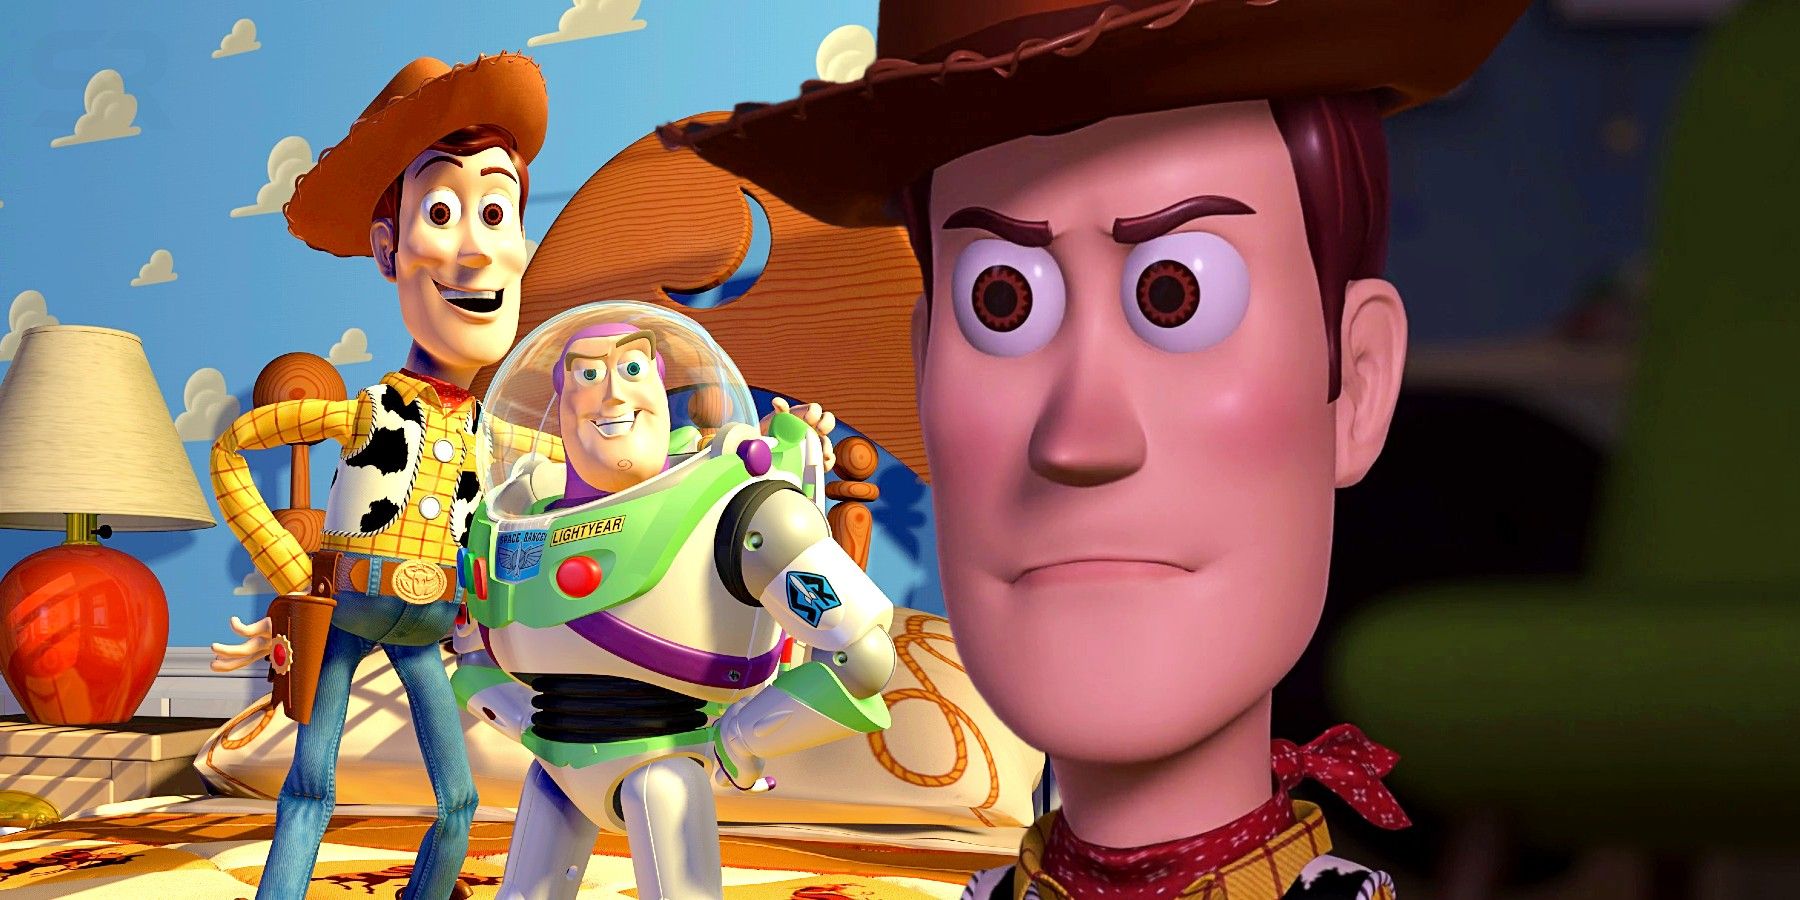 Toy Story's Original Woody Villain Plan (& Why It Changed)